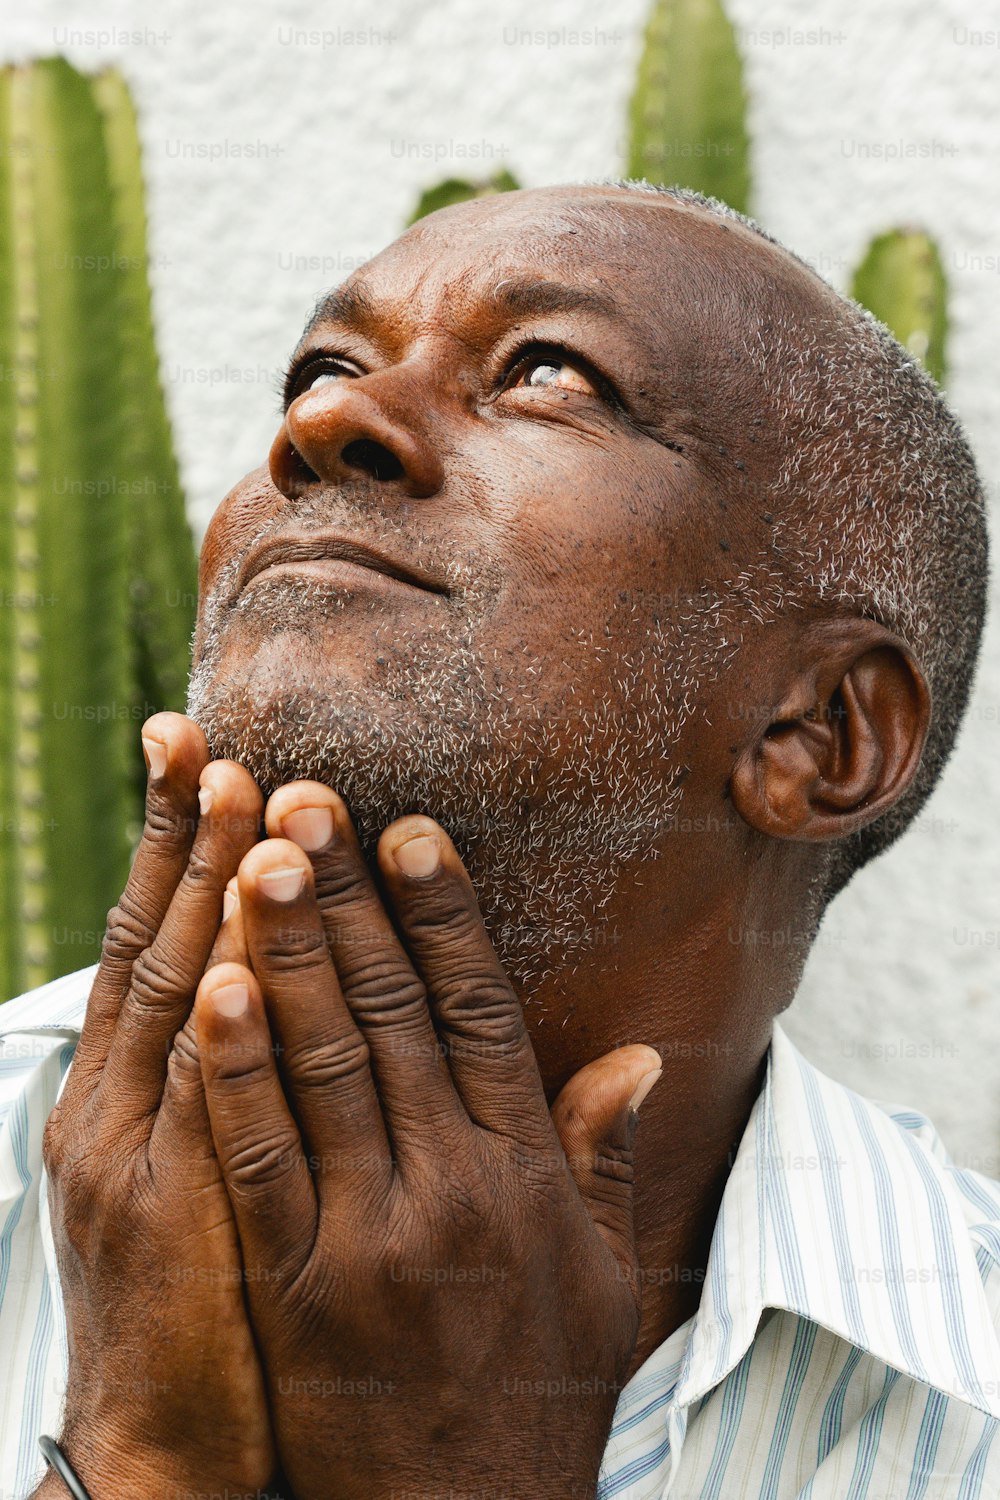 a man is praying in front of a cactus